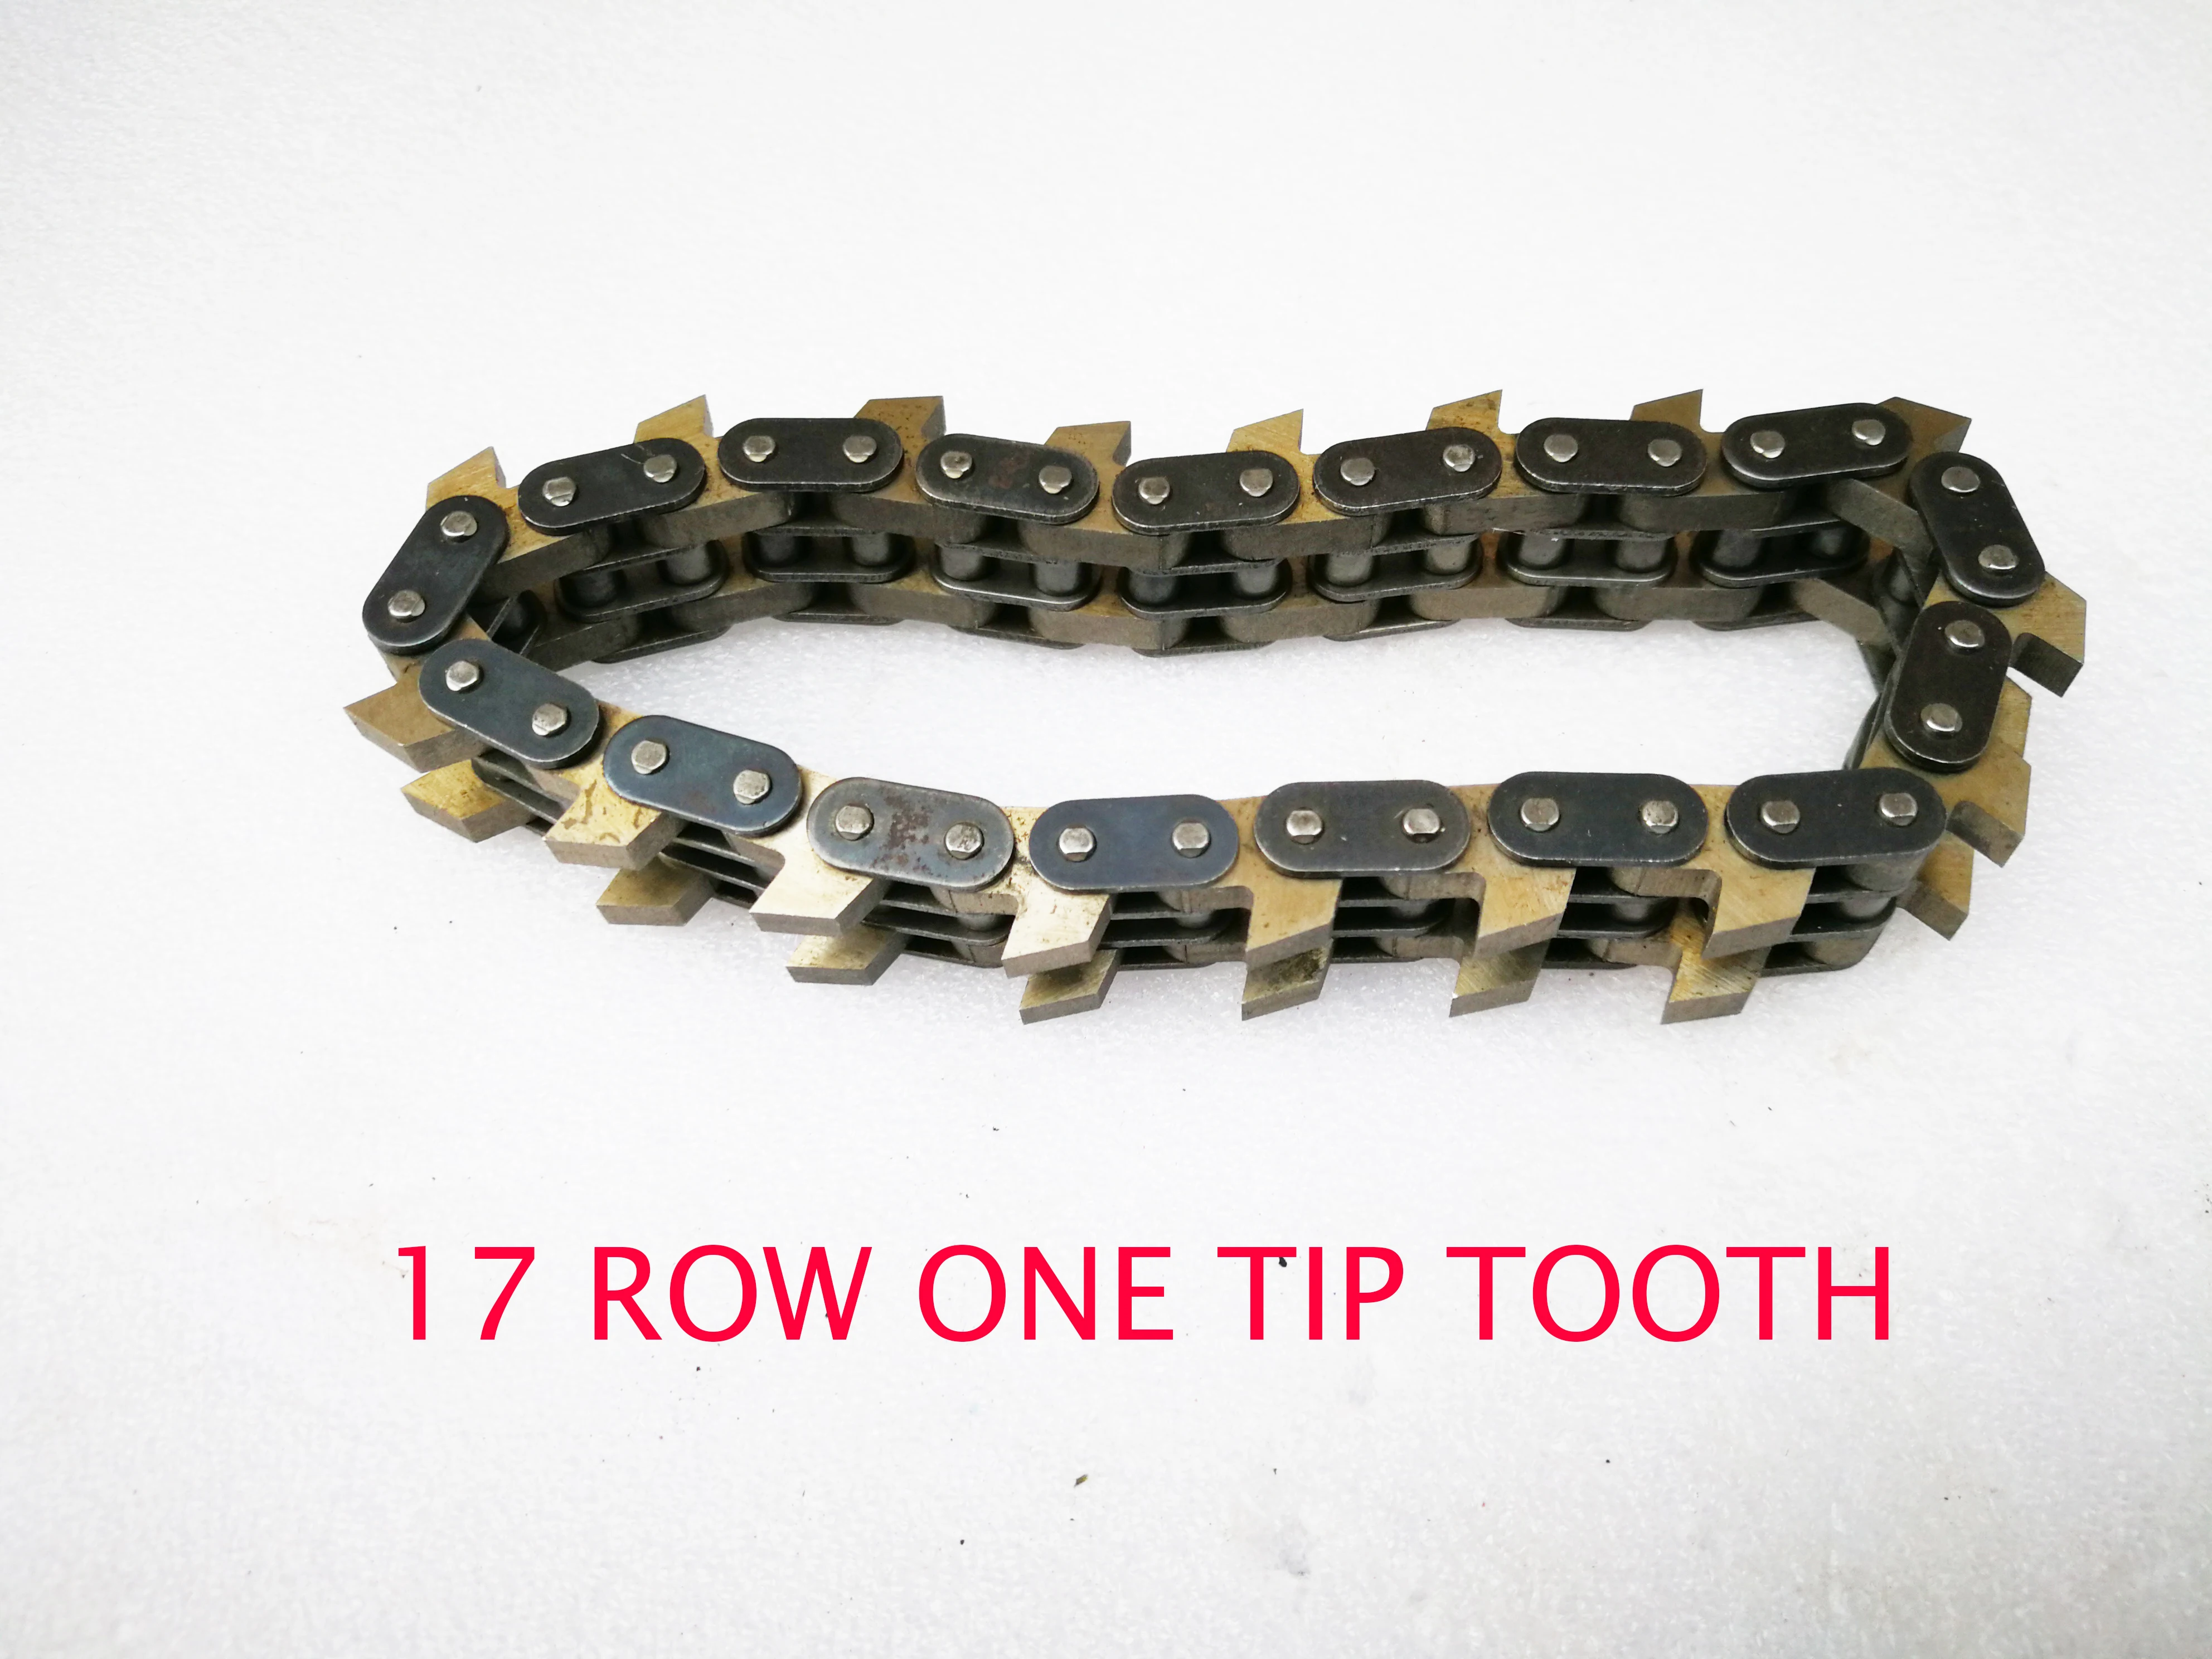 17 Row One Tip Middle Tooth Joint Cutter Saw Chain For Pneumatic Waste Stripper Carton Paper Stripping Machine Detachable Hinge